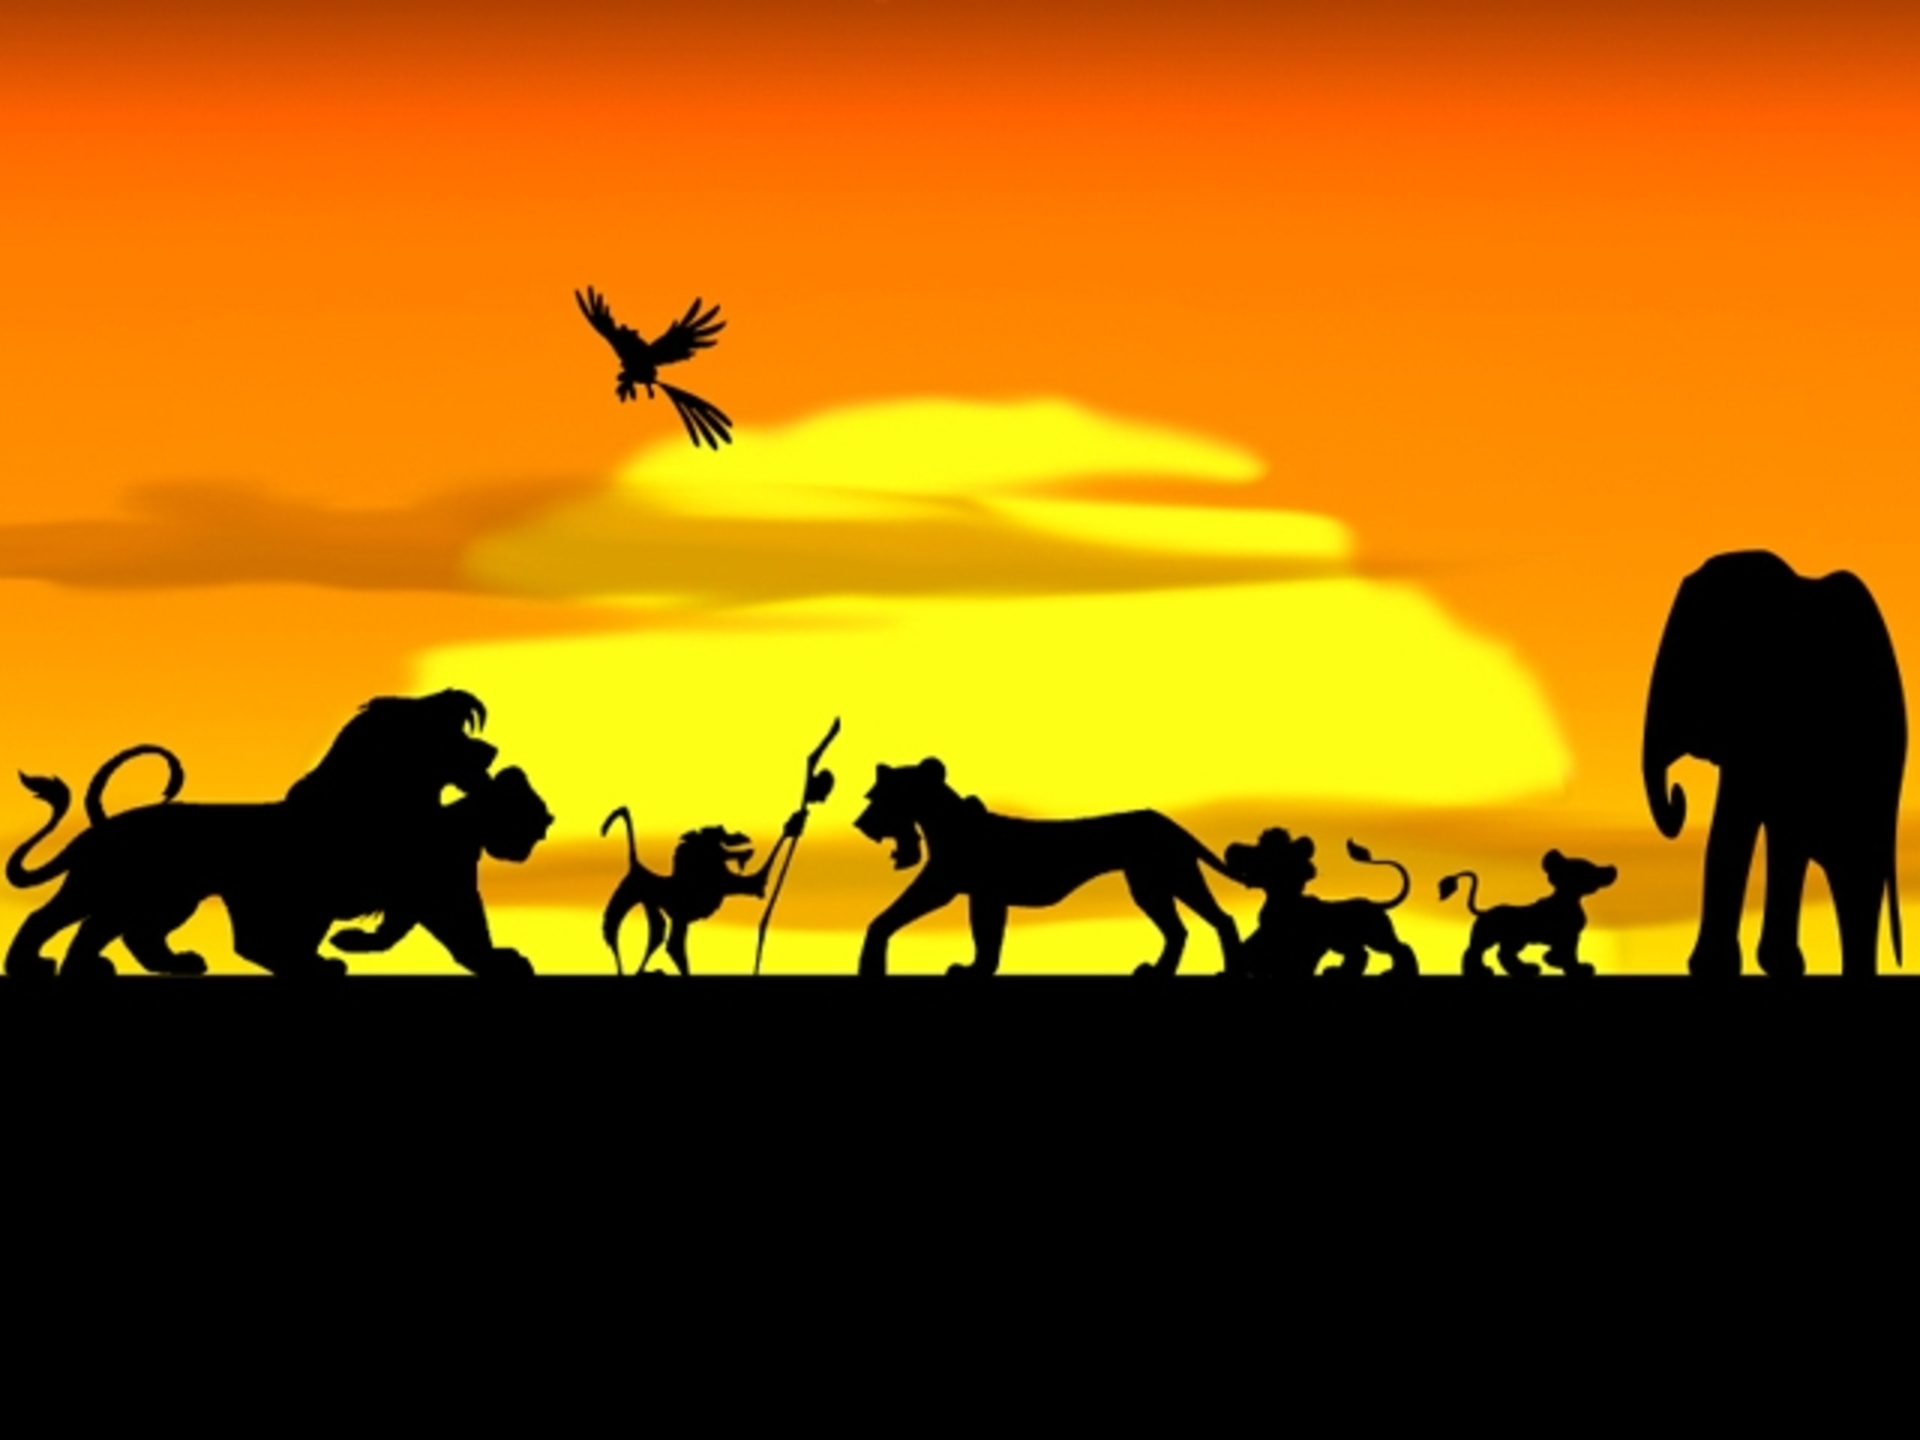 Sunset Disney Company silhouettes The Lion King wallpaper